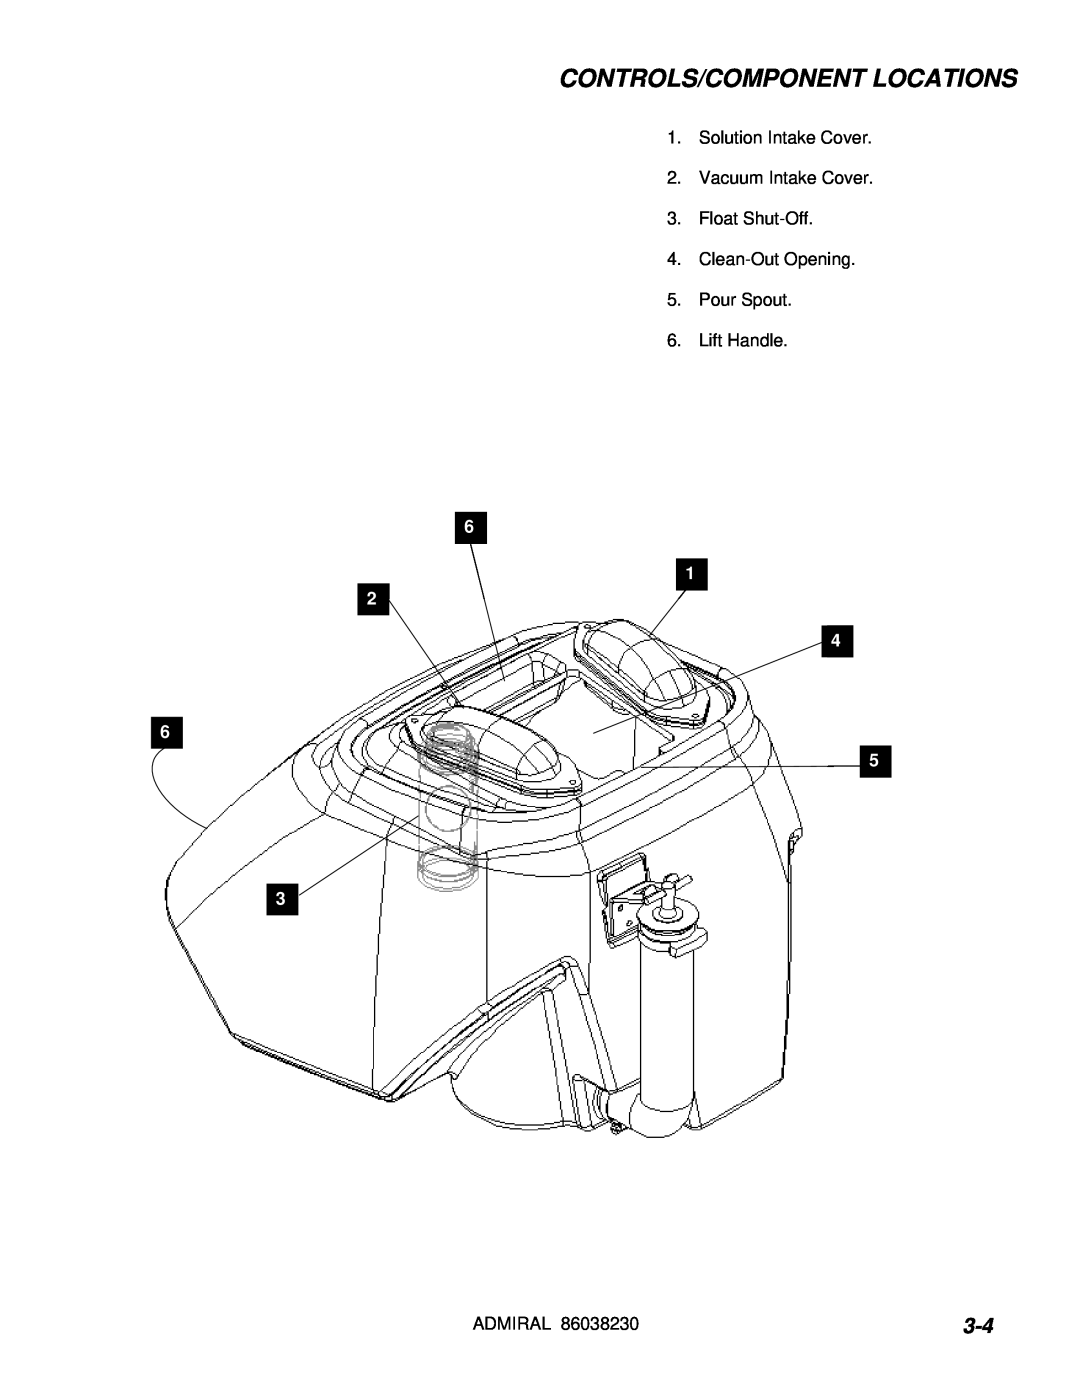 Windsor ADM8 10080170 Controls/Component Locations, Solution Intake Cover 2.Vacuum Intake Cover, Lift Handle, Admiral 